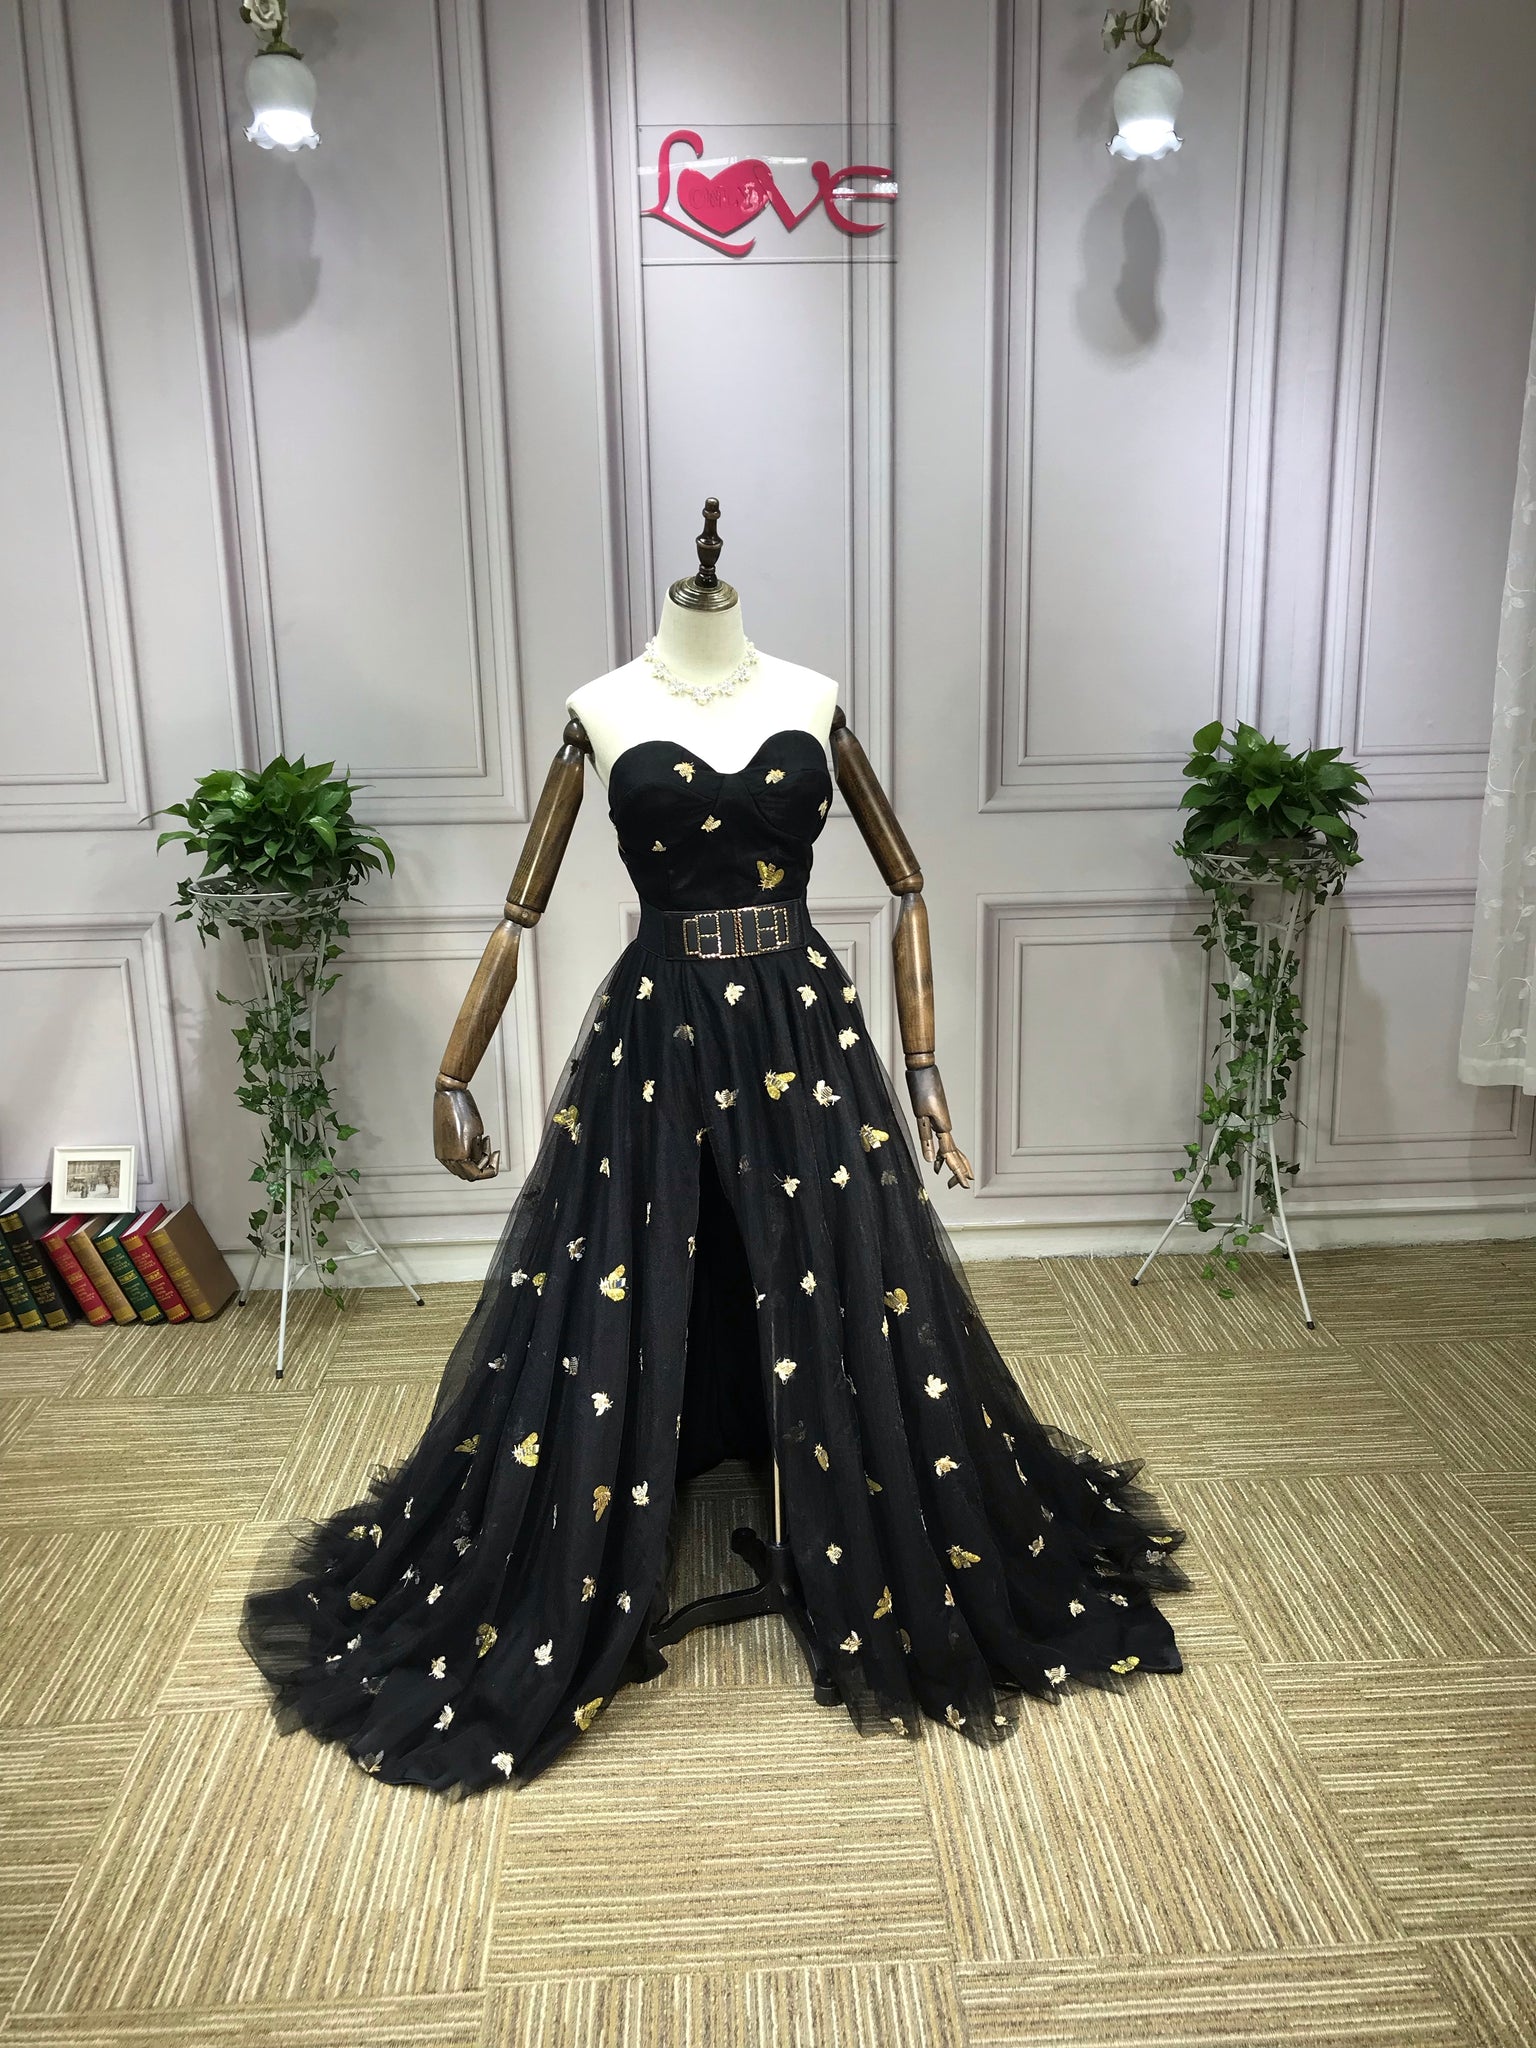 Gold Dresses for Women, Shop Gold Dresses for Prom & Wedding | Couture Candy